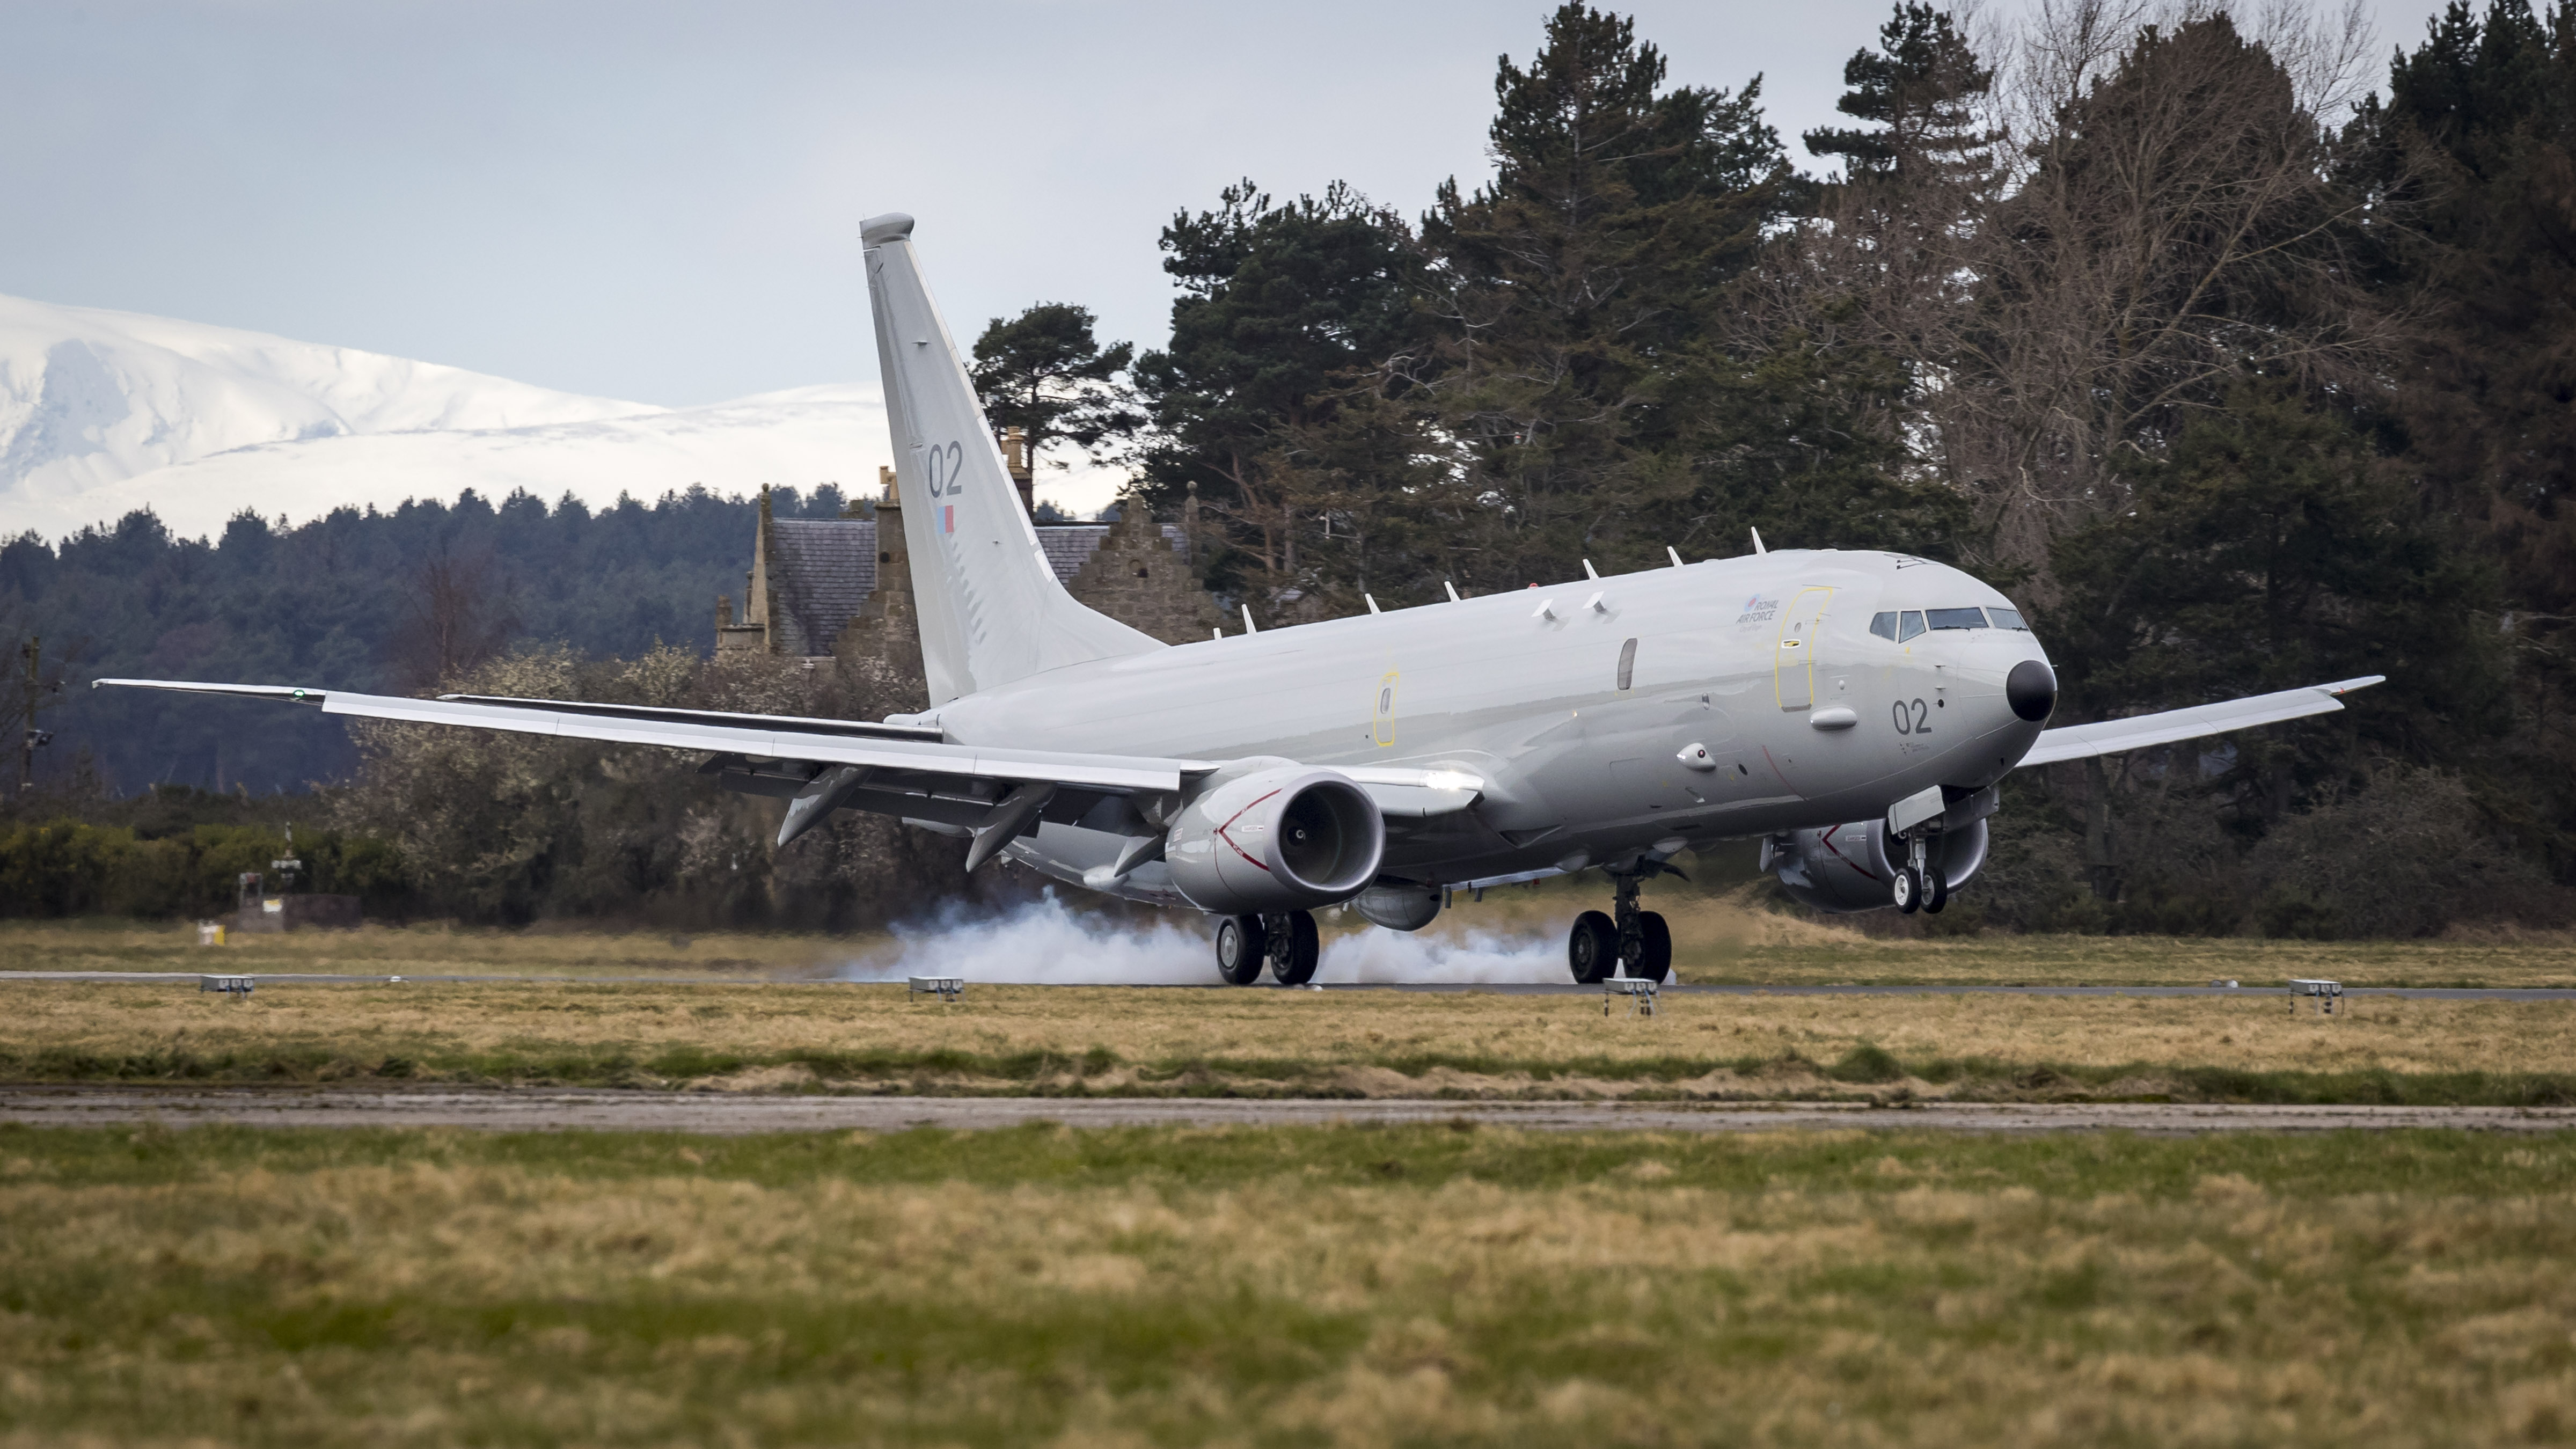 Five of the nine aircrafts of the planned Poseidon fleet are now based at RAF Lossiemouth